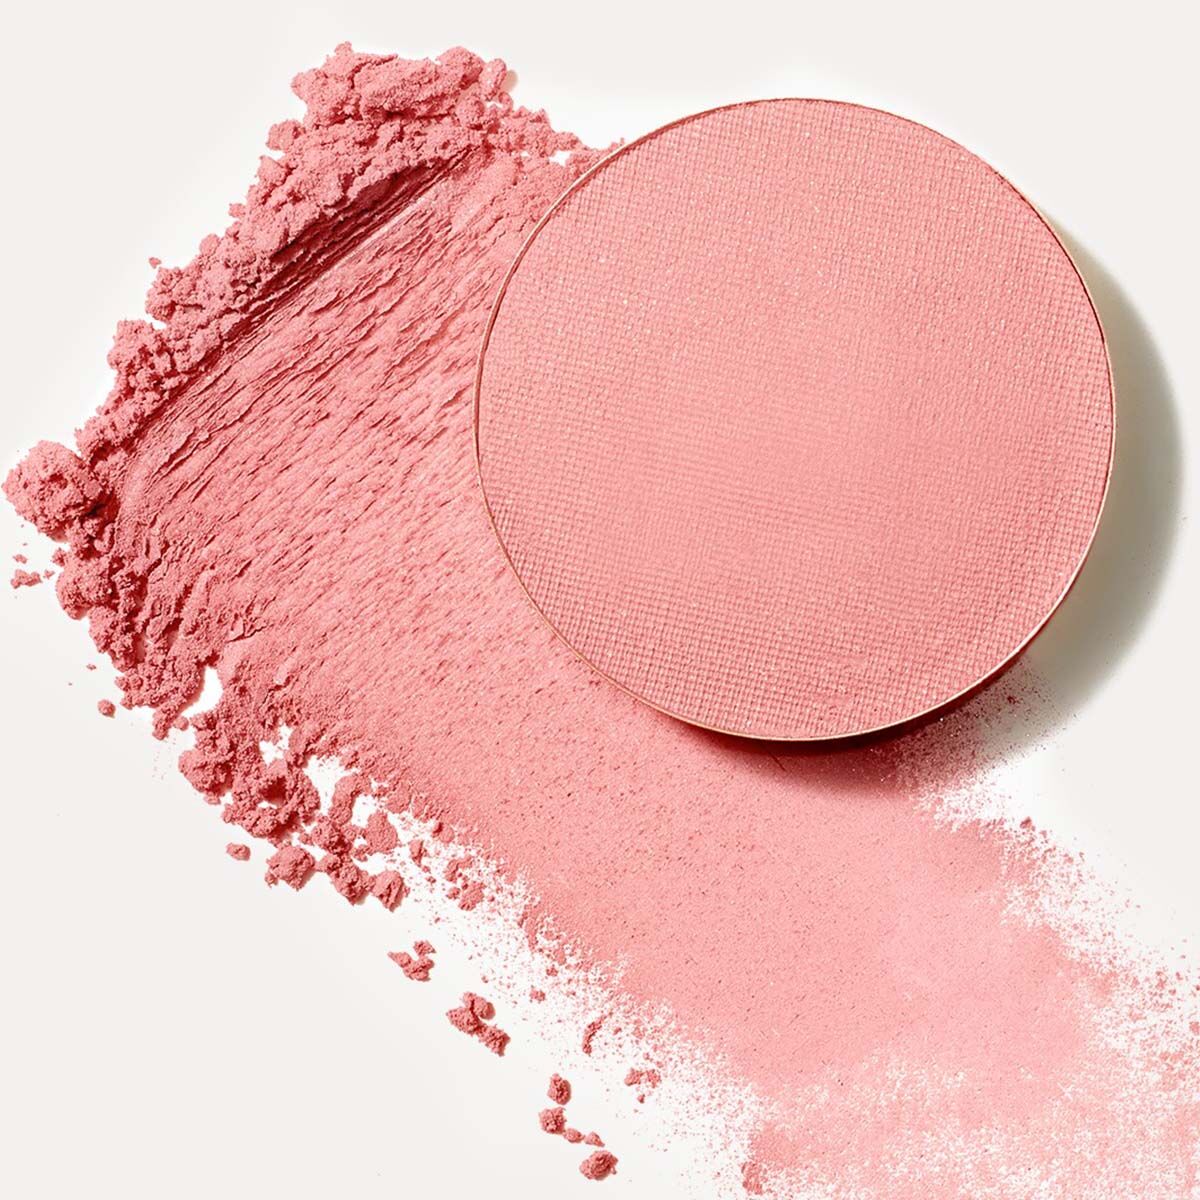 HOW TO FIND THE BEST BLUSH COLOUR FOR YOUR SKIN TONE